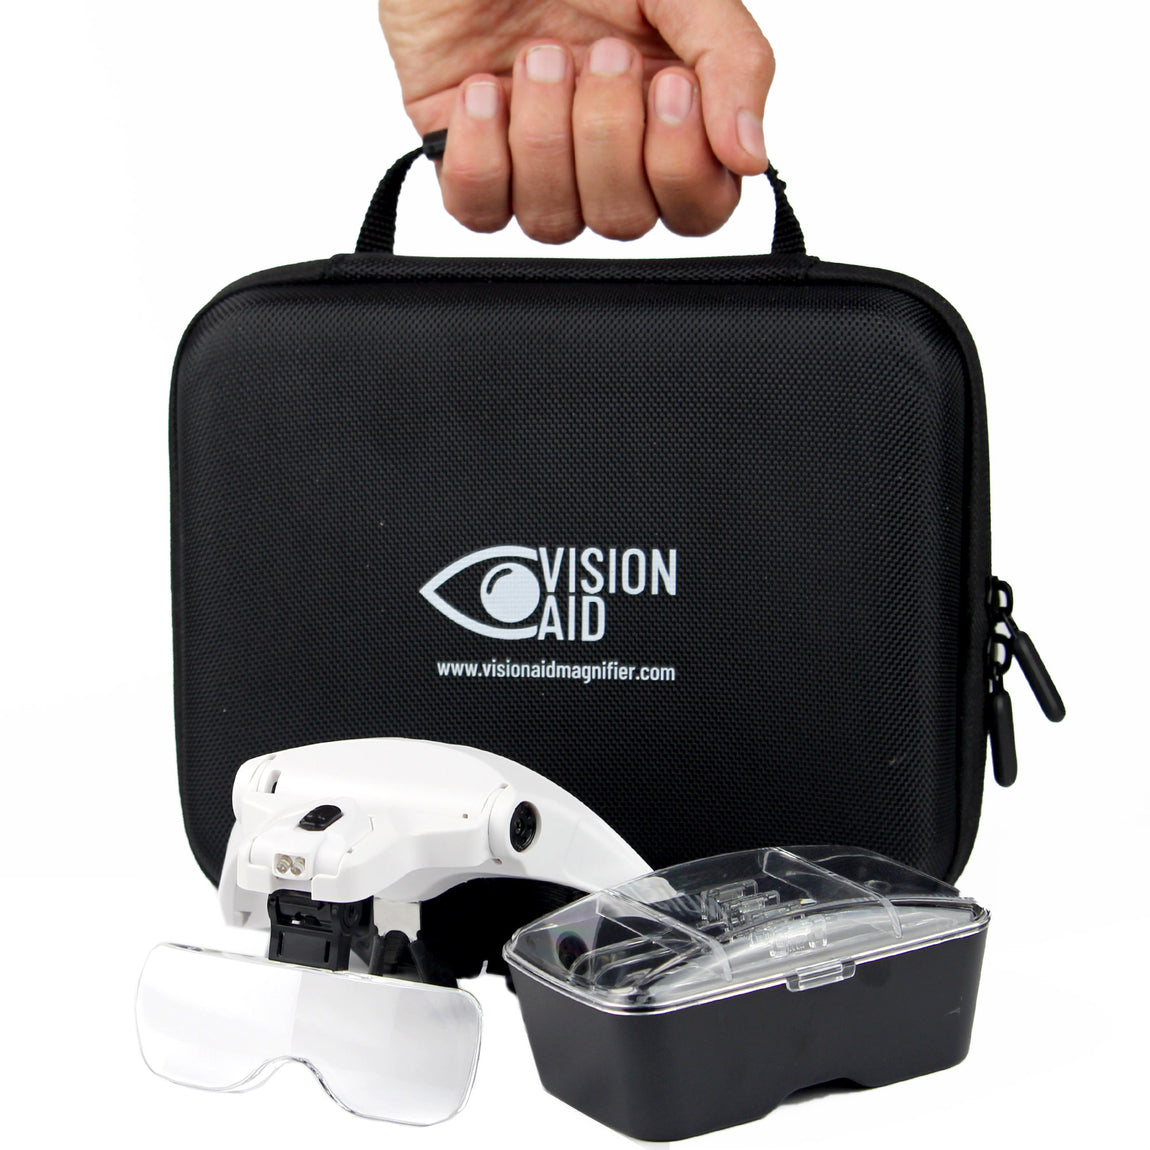 VISION AID Magnifying Glasses with A Storage Case (Battery Version) - Hobbyist Edition